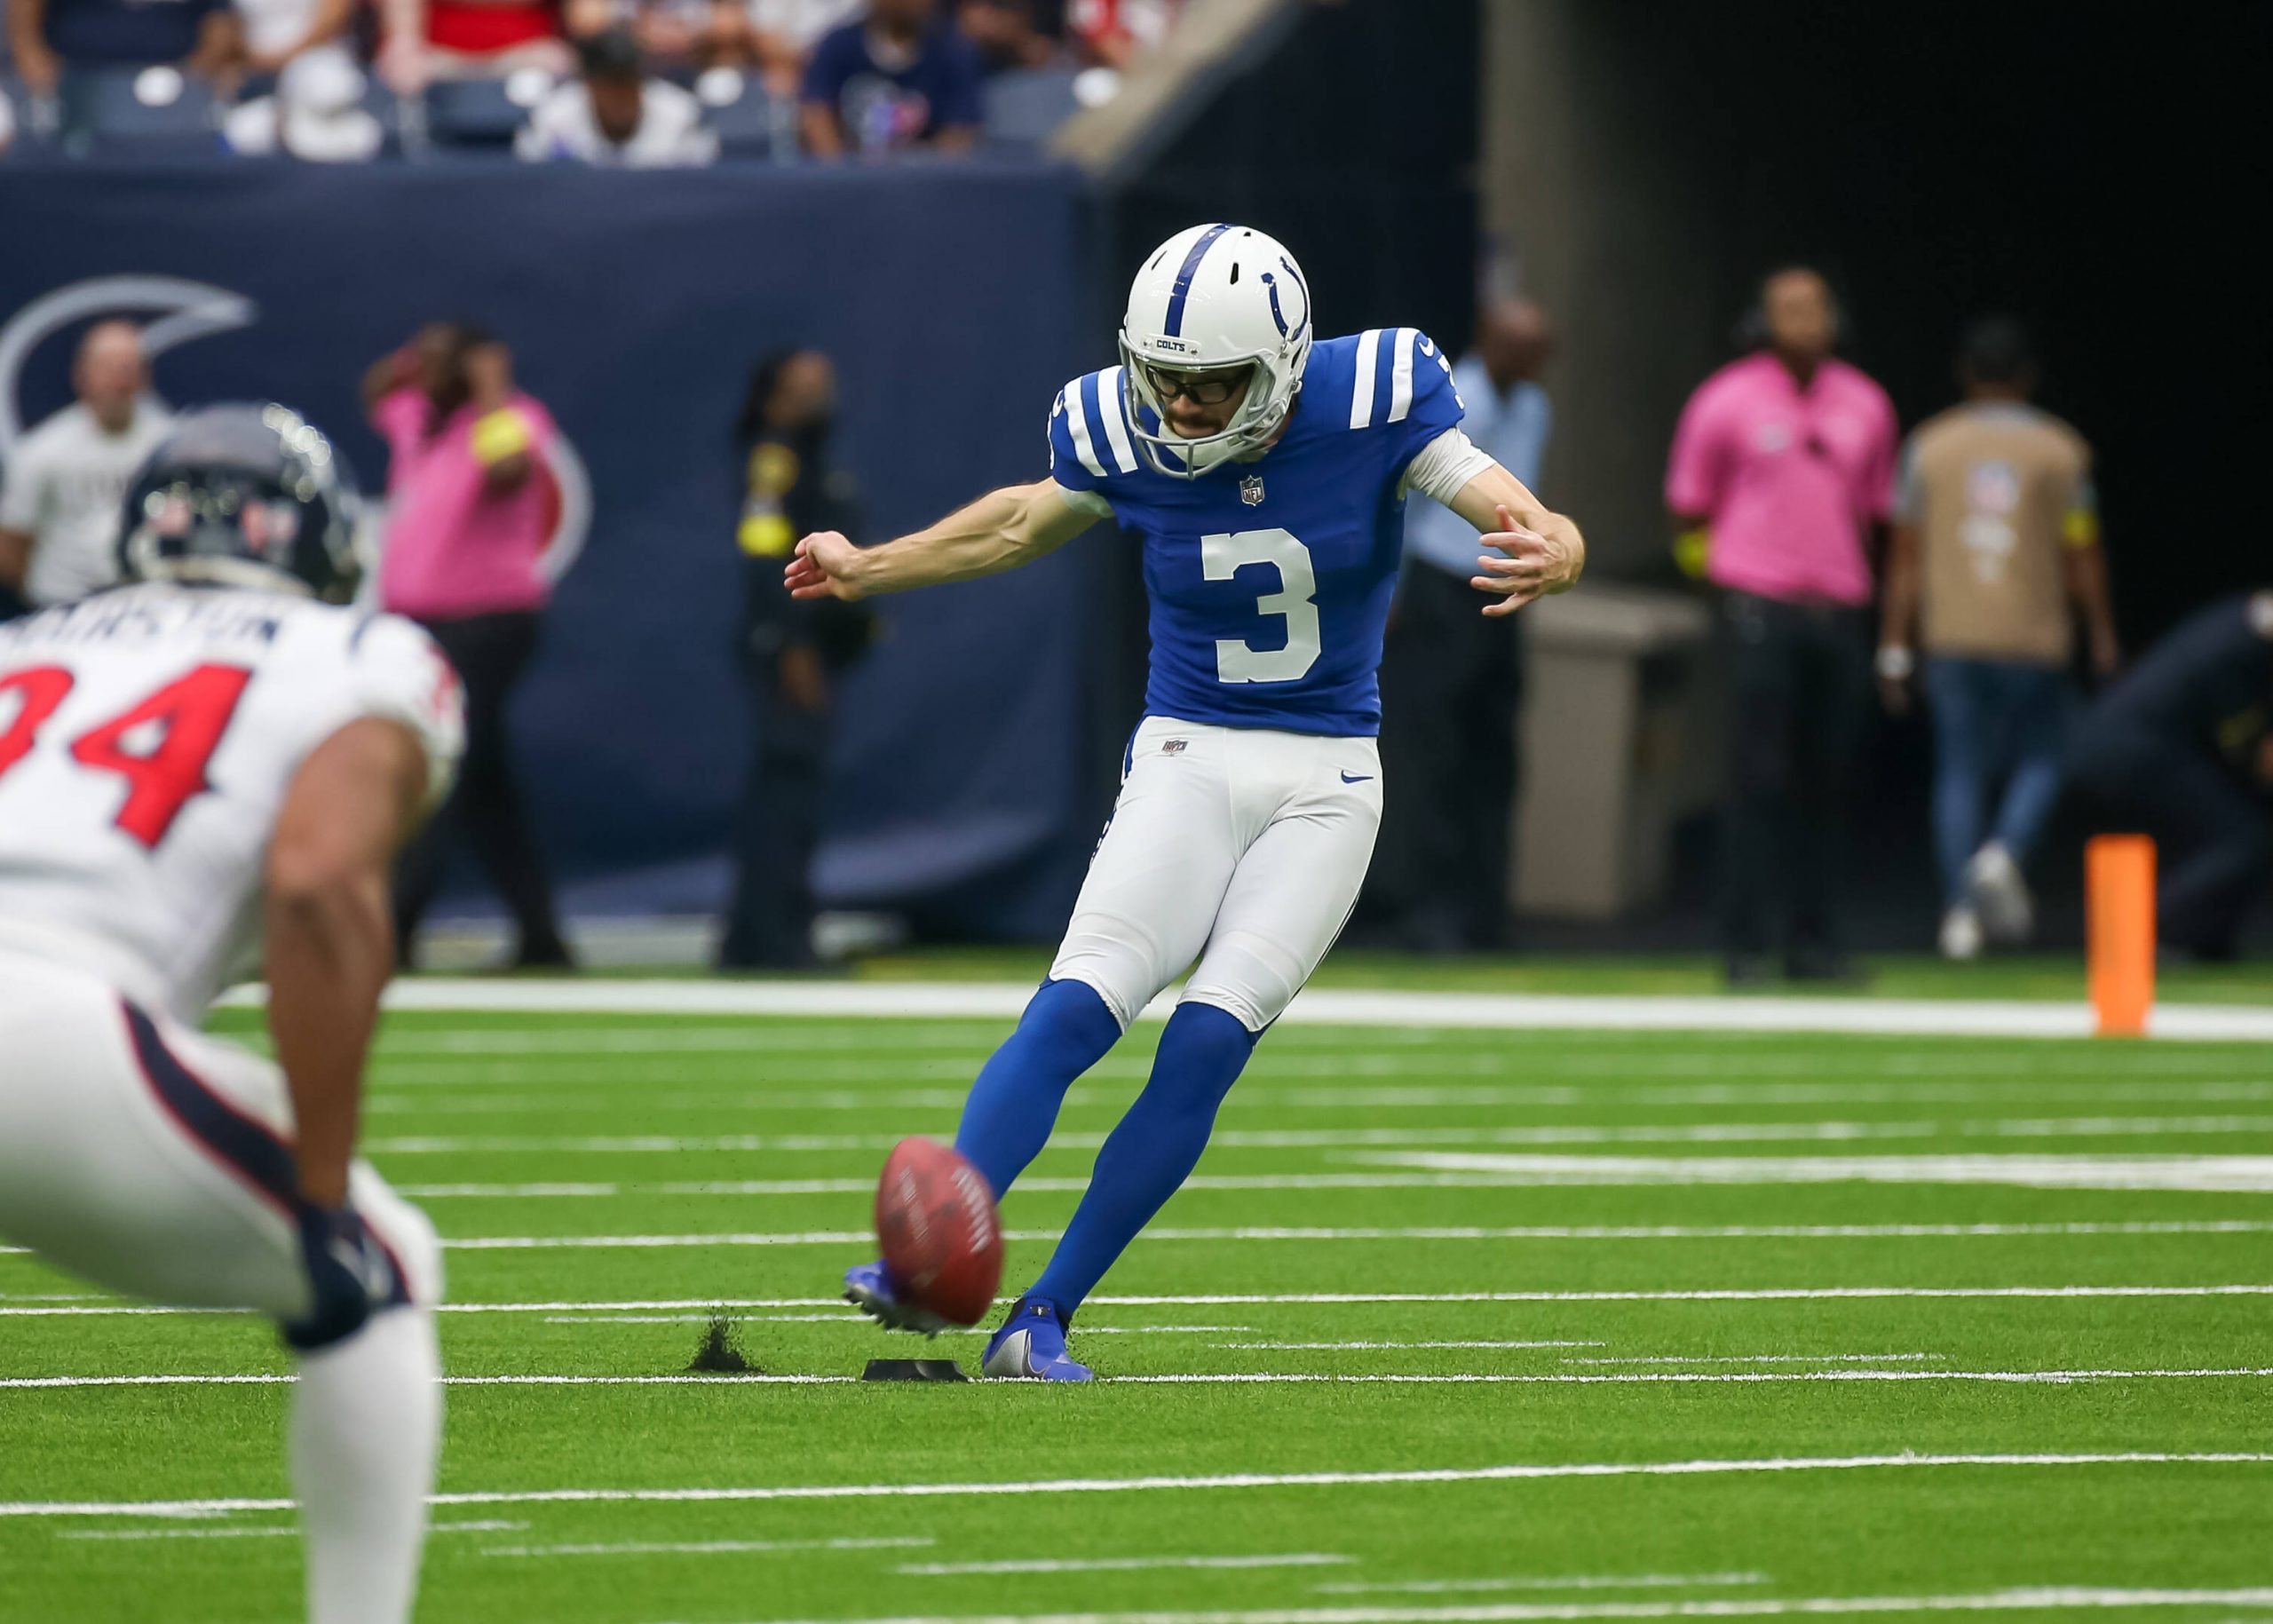 HOUSTON, TX - SEPTEMBER 11: Indianapolis Colts place kicker Rodrigo Blankenship 3 kicks the ball in the first quarter during the NFL, American Football Herren, USA game between the Indianapolis Colts and Houston Texans on September 11, 2022 at NRG Stadium in Houston, Texas. Photo by Leslie Plaza Johnson/Icon Sportswire NFL: SEP 11 Colts at Texans Icon220911019